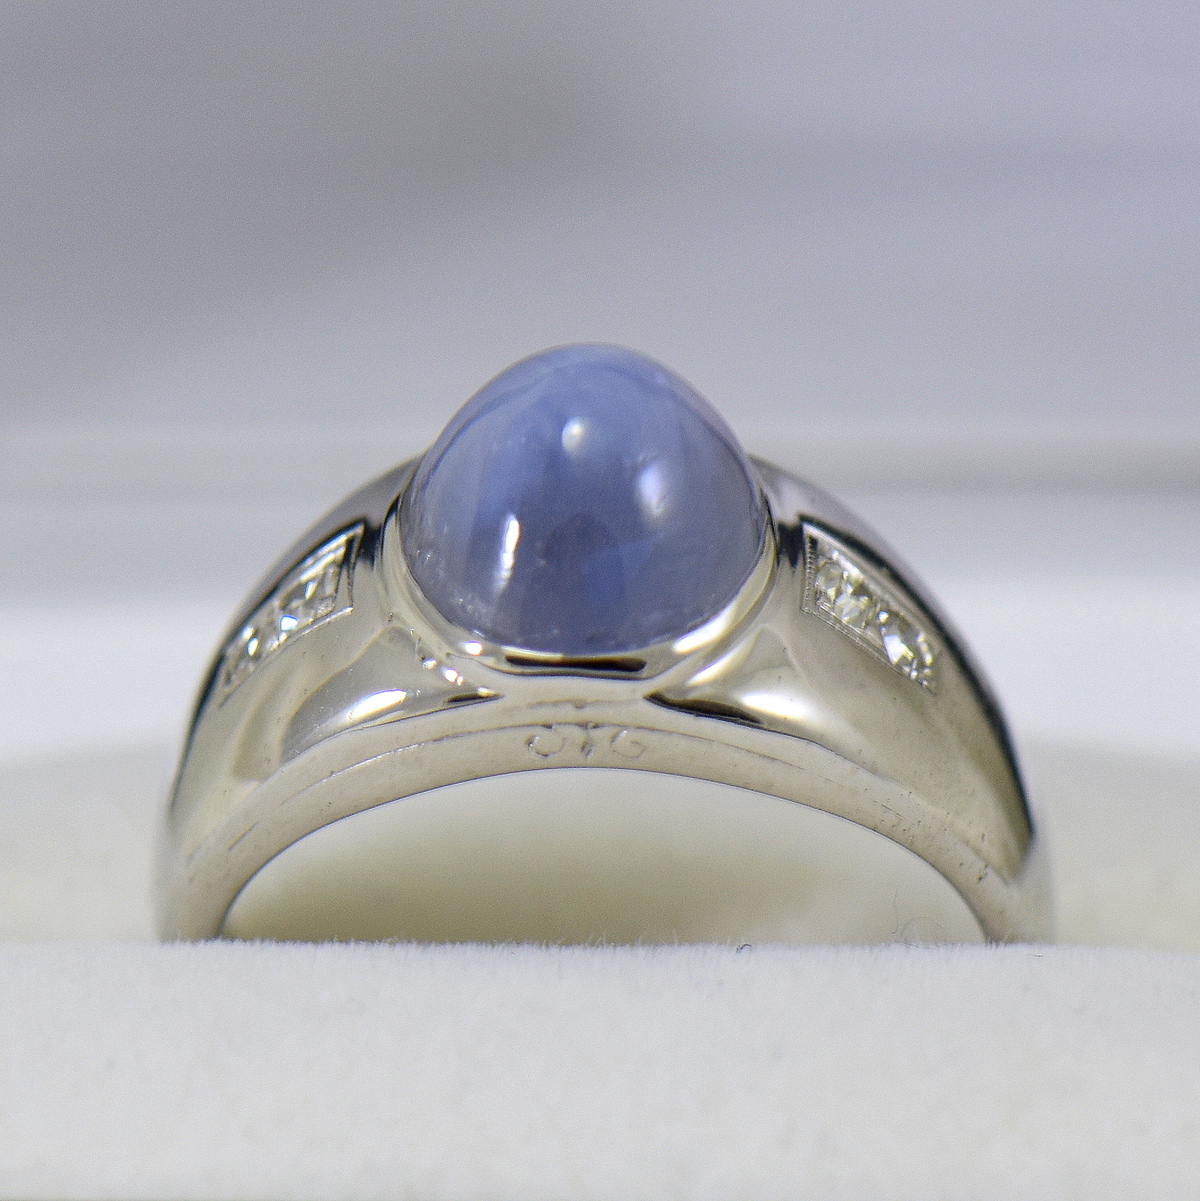 Blue Star Sapphire Men's Ring circa 1930s | Exquisite Jewelry for Every ...